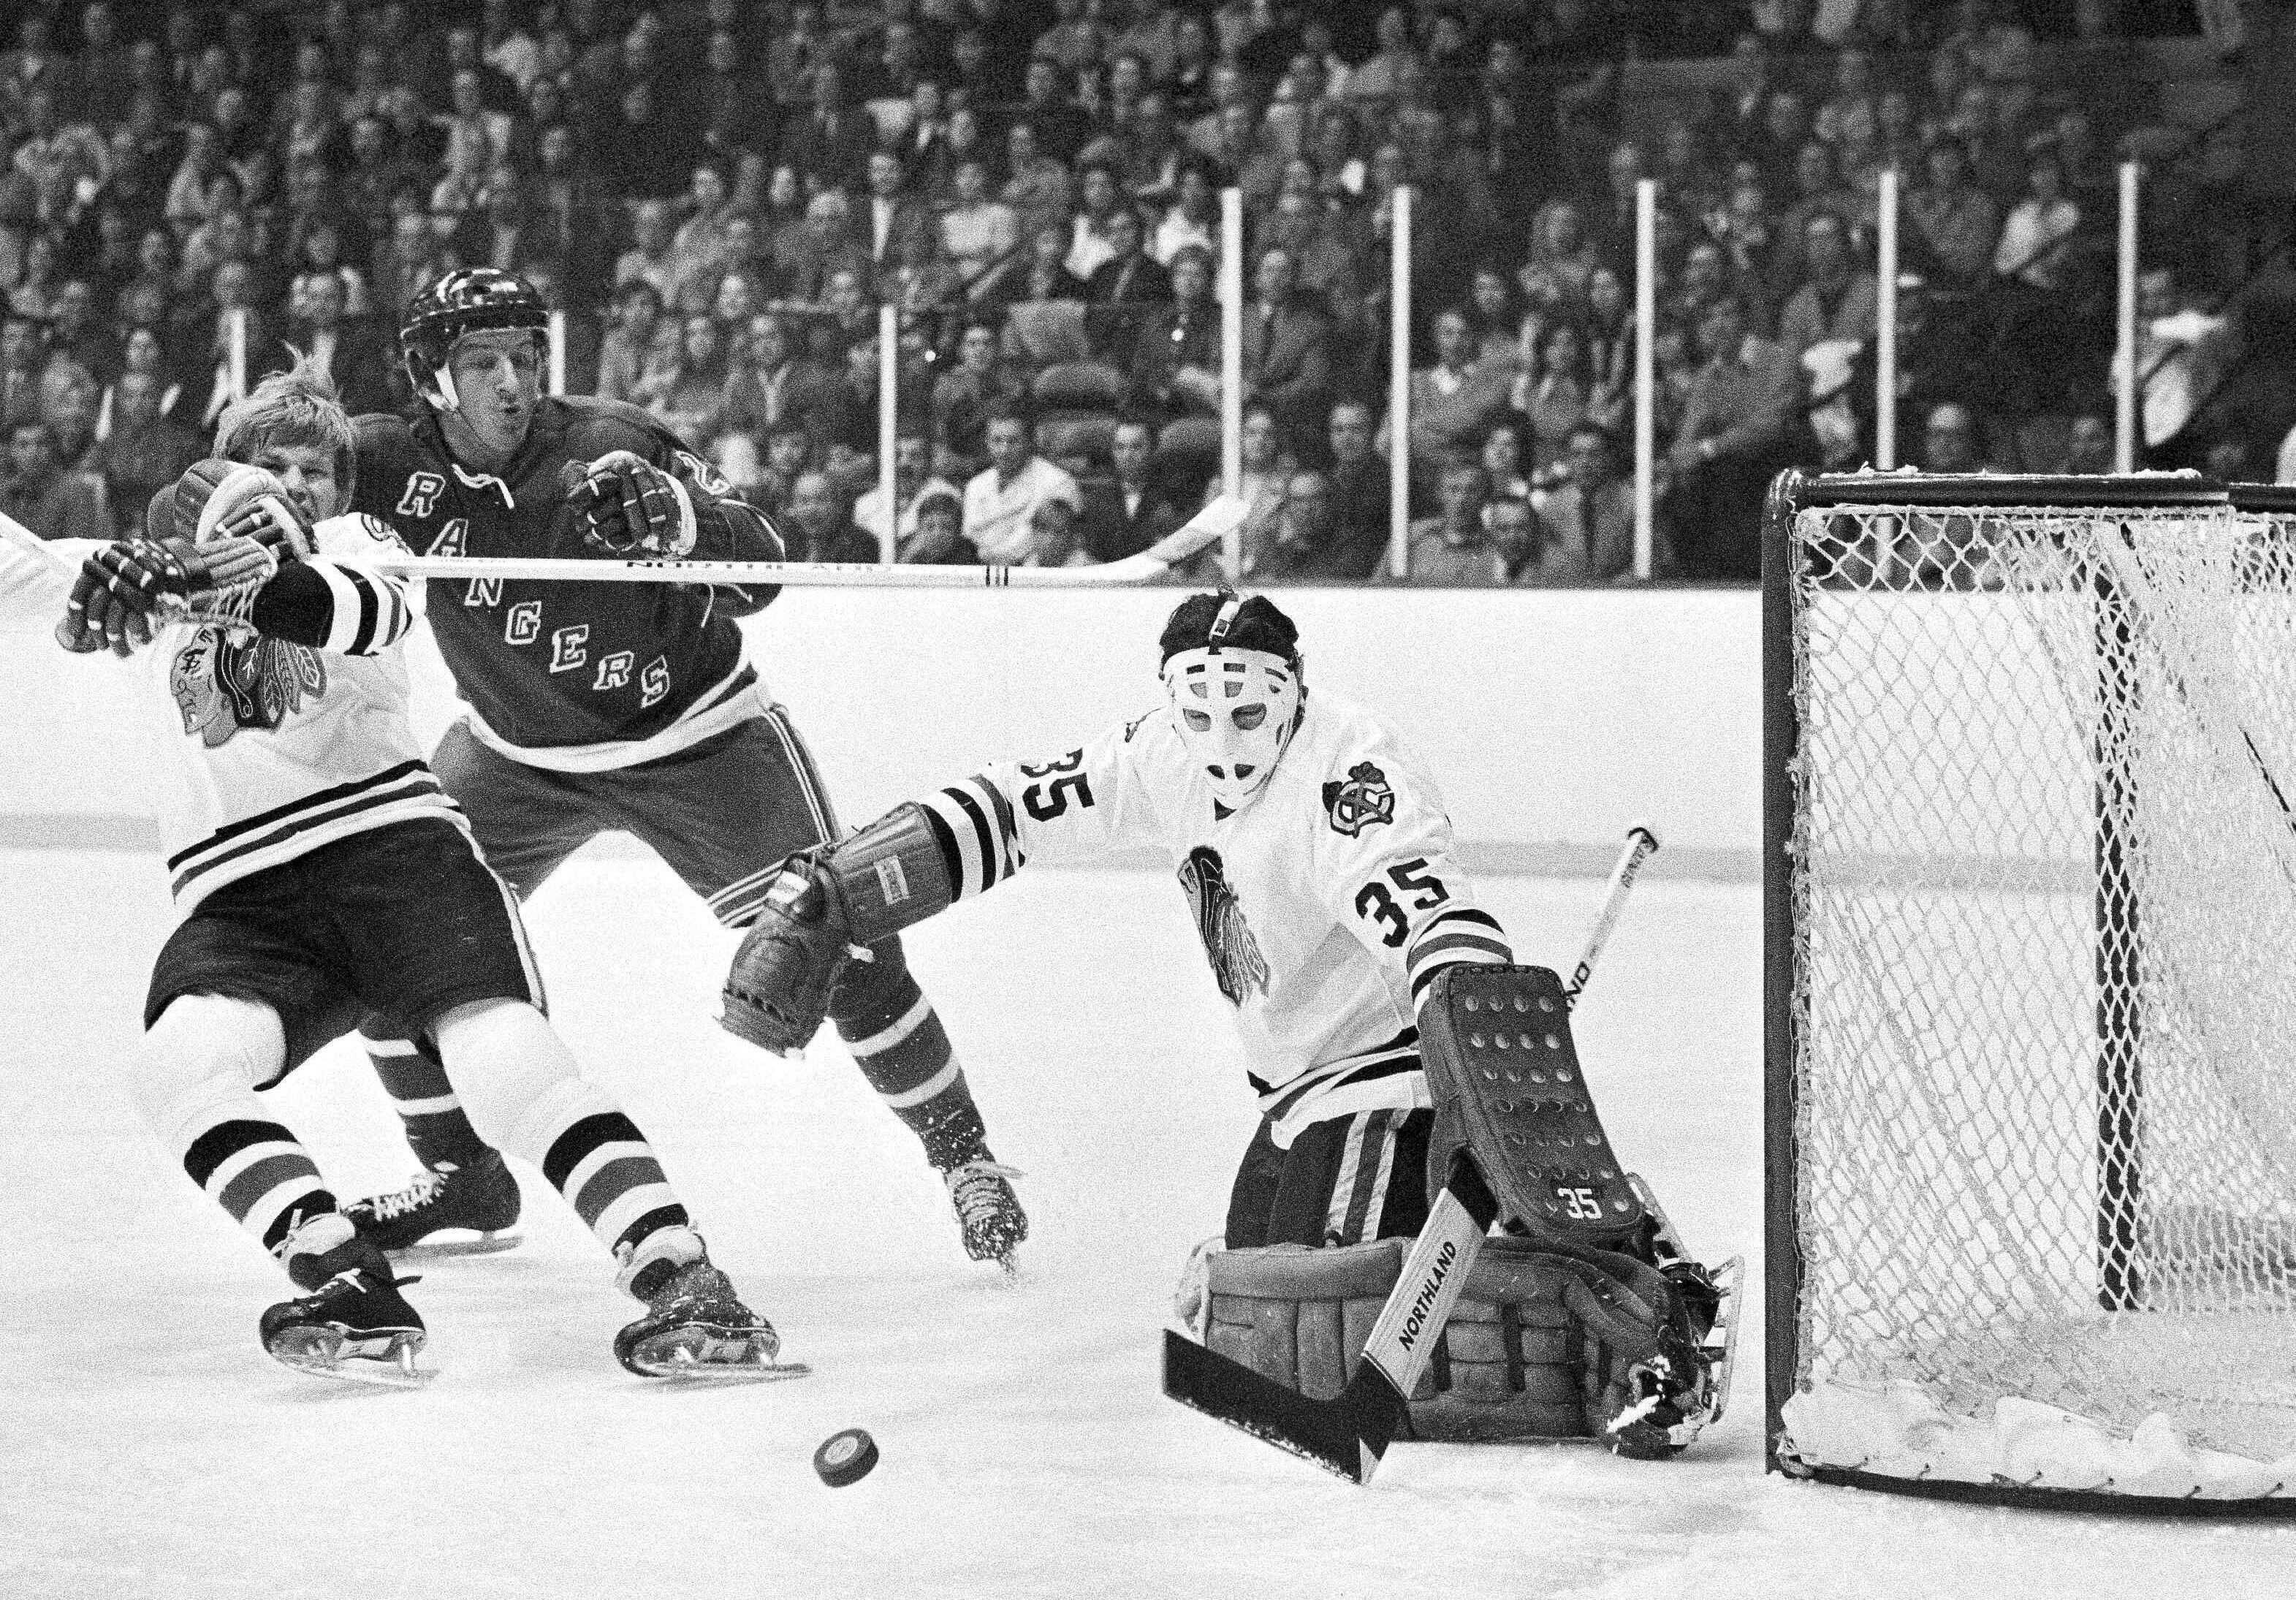 Hall of Fame goalie Tony Esposito dead at 78, Trending